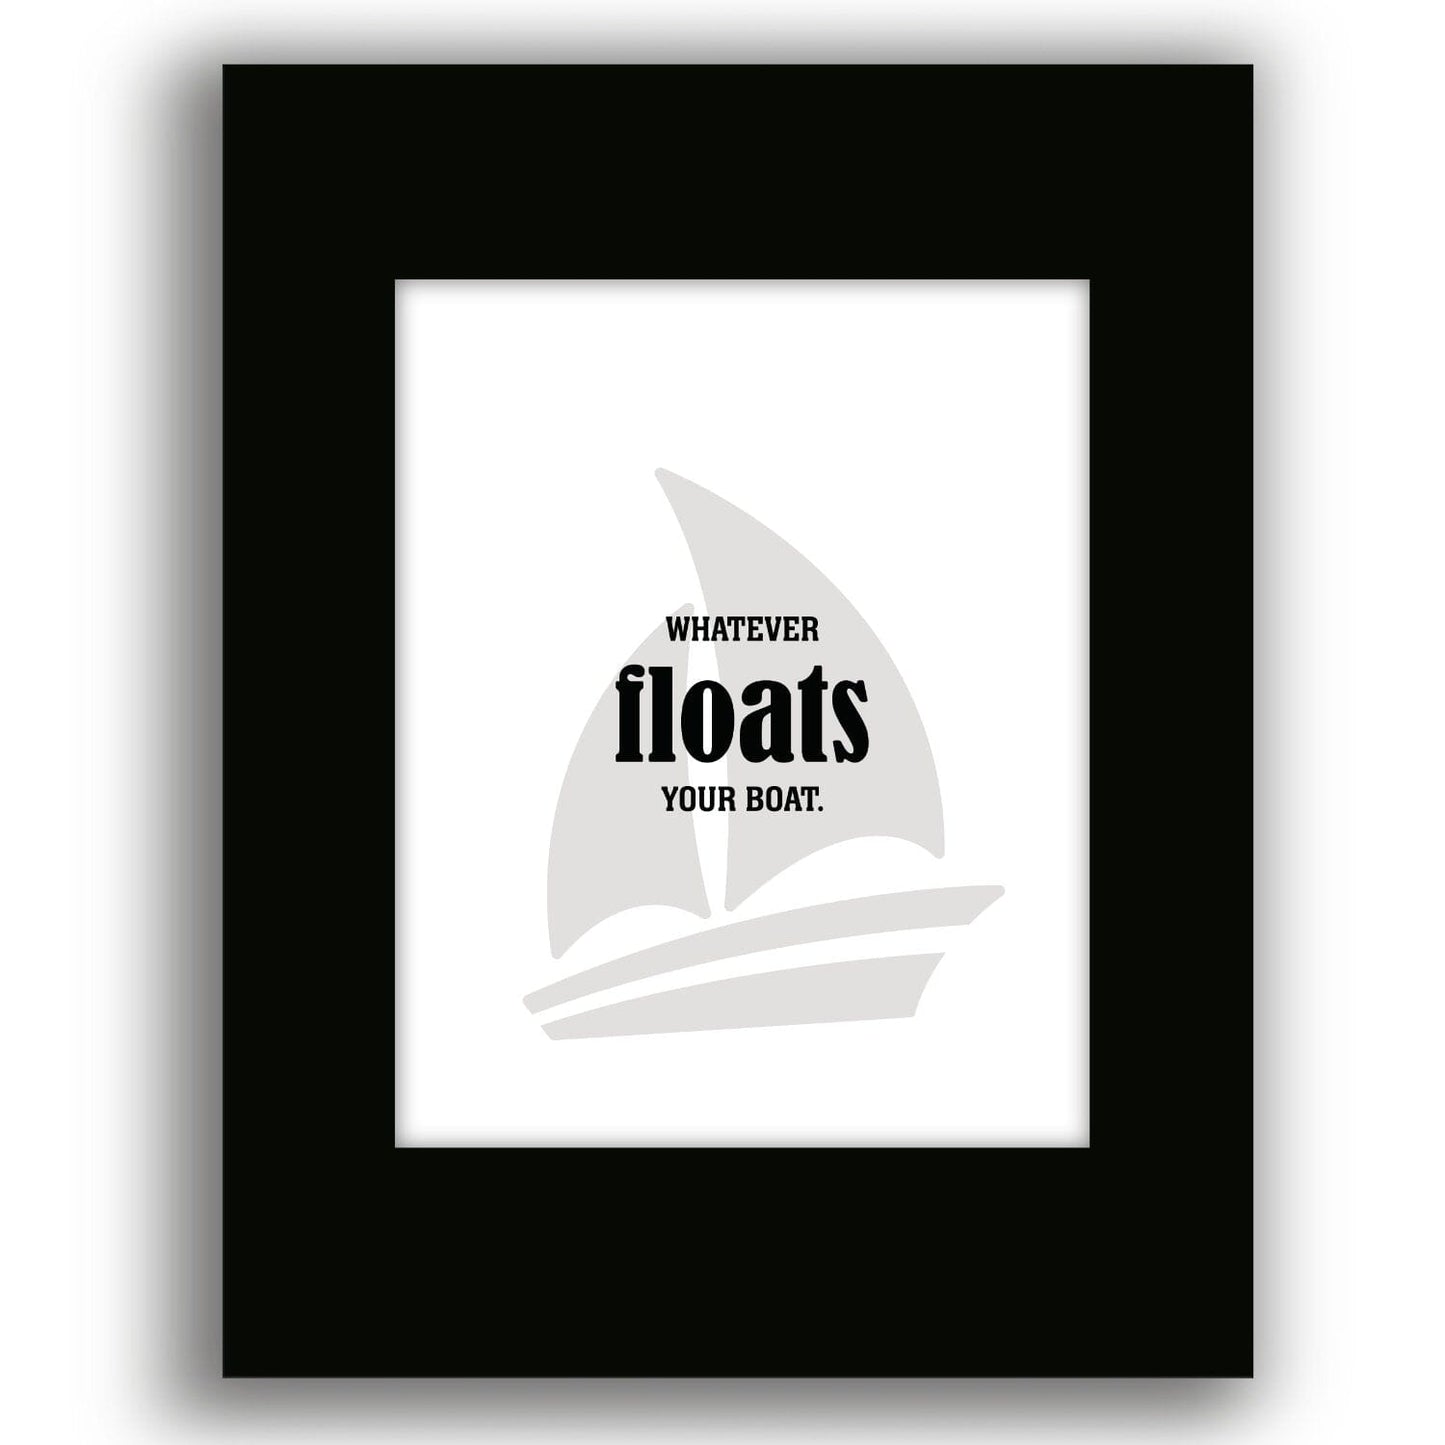 Whatever Floats Your Boat - Wise and Witty Wall Print Art Wise and Wiseass Quotes Song Lyrics Art 8x10 Unframed Black Matted Print 